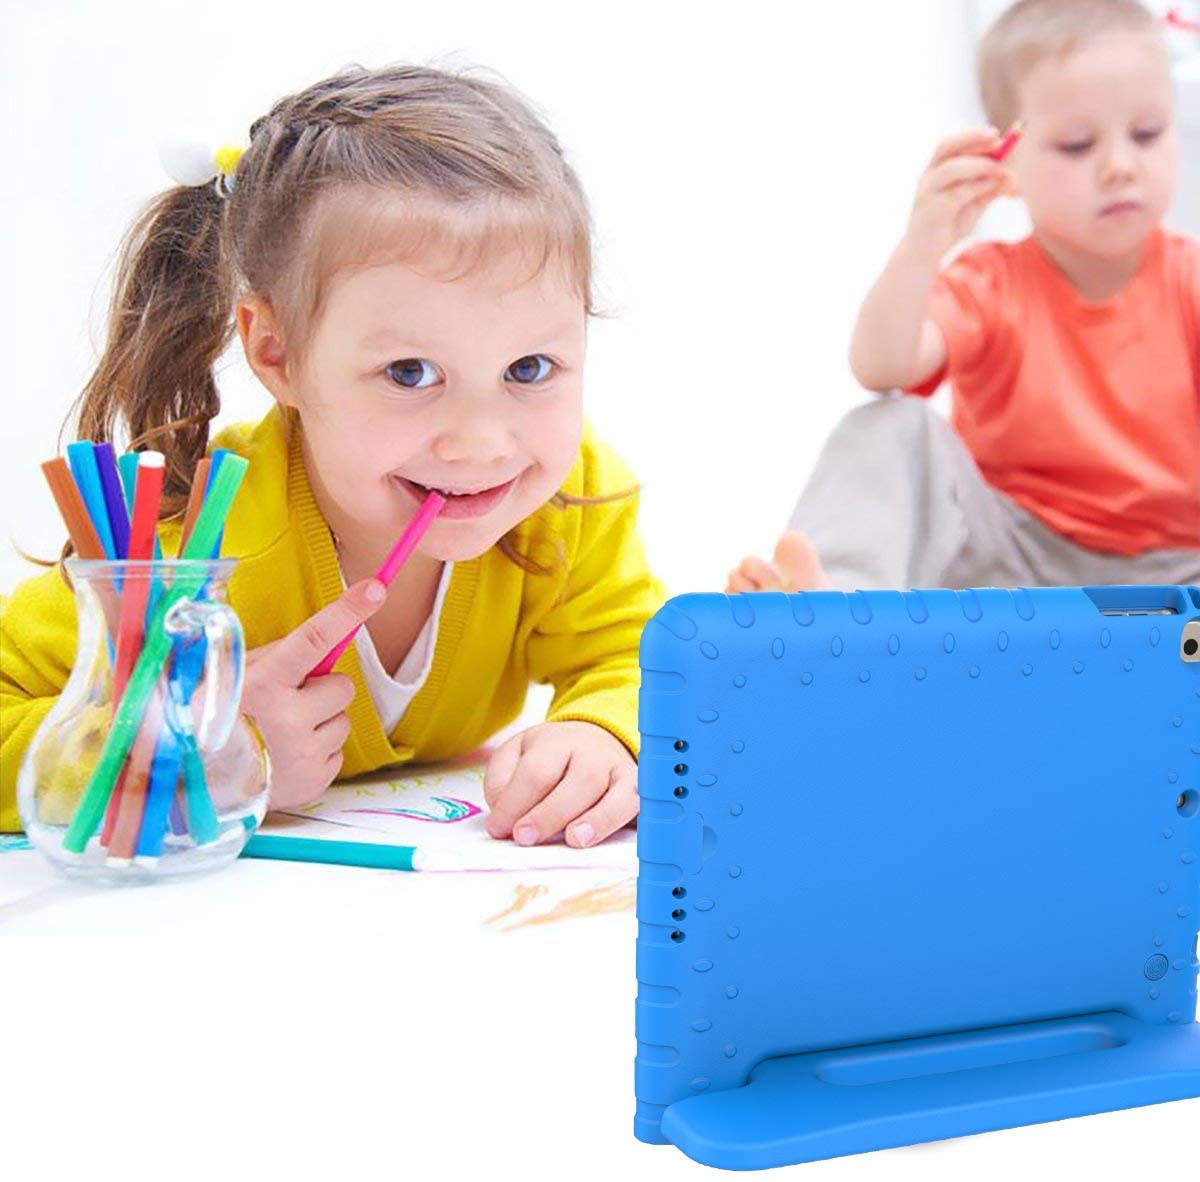 BMOUO iPad 2 3 4 Shockproof Case Light Weight Kids Case Super Protection Cover Handle Stand Case - e4cents